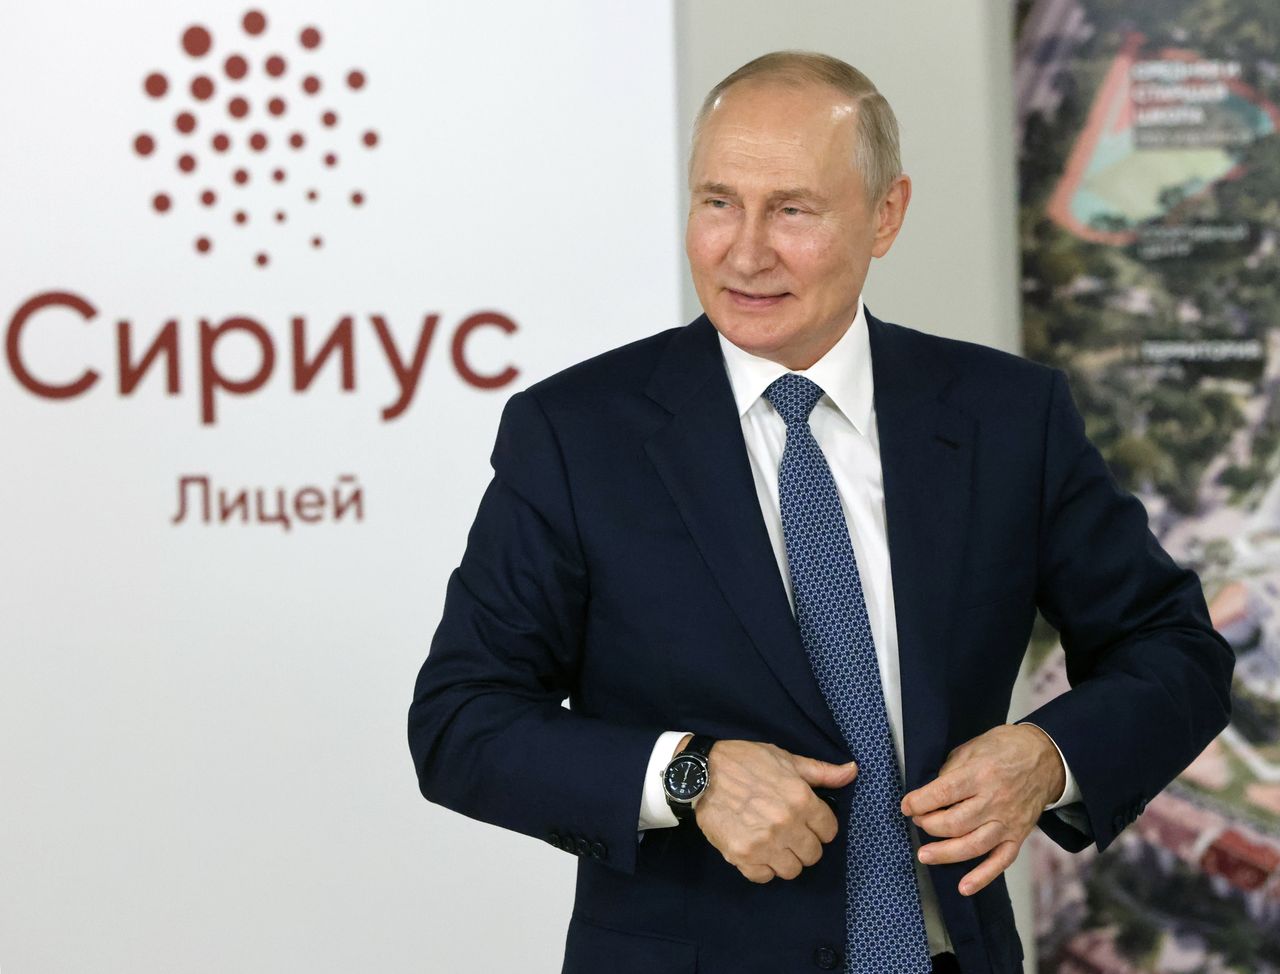 How old is Putin? His age differs from official data